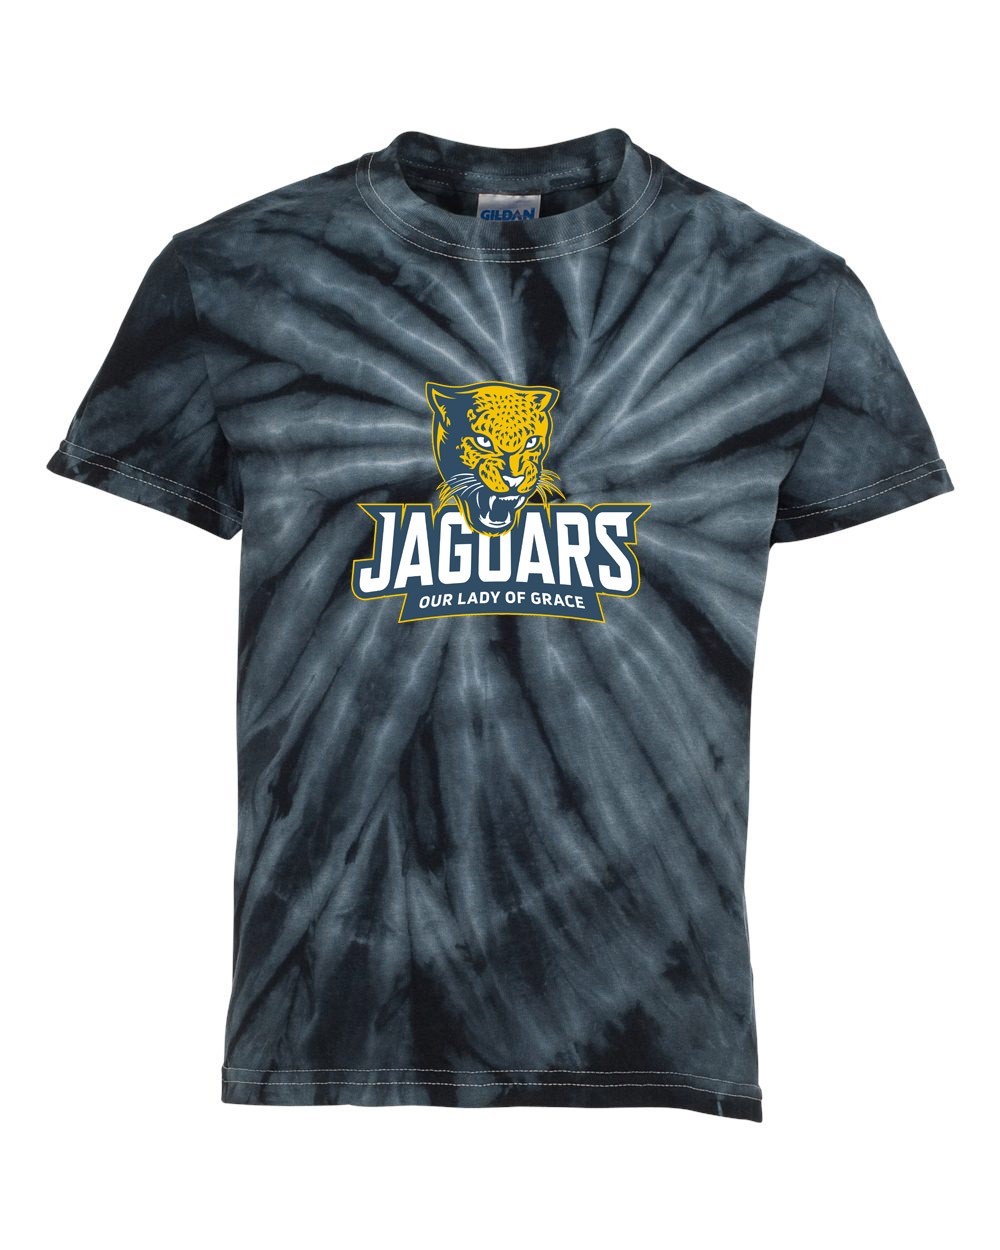 OLG Staff S/S Tie Dye T-Shirt w/ Logo #F11-F15 - Please Allow 2-3 Weeks for Delivery